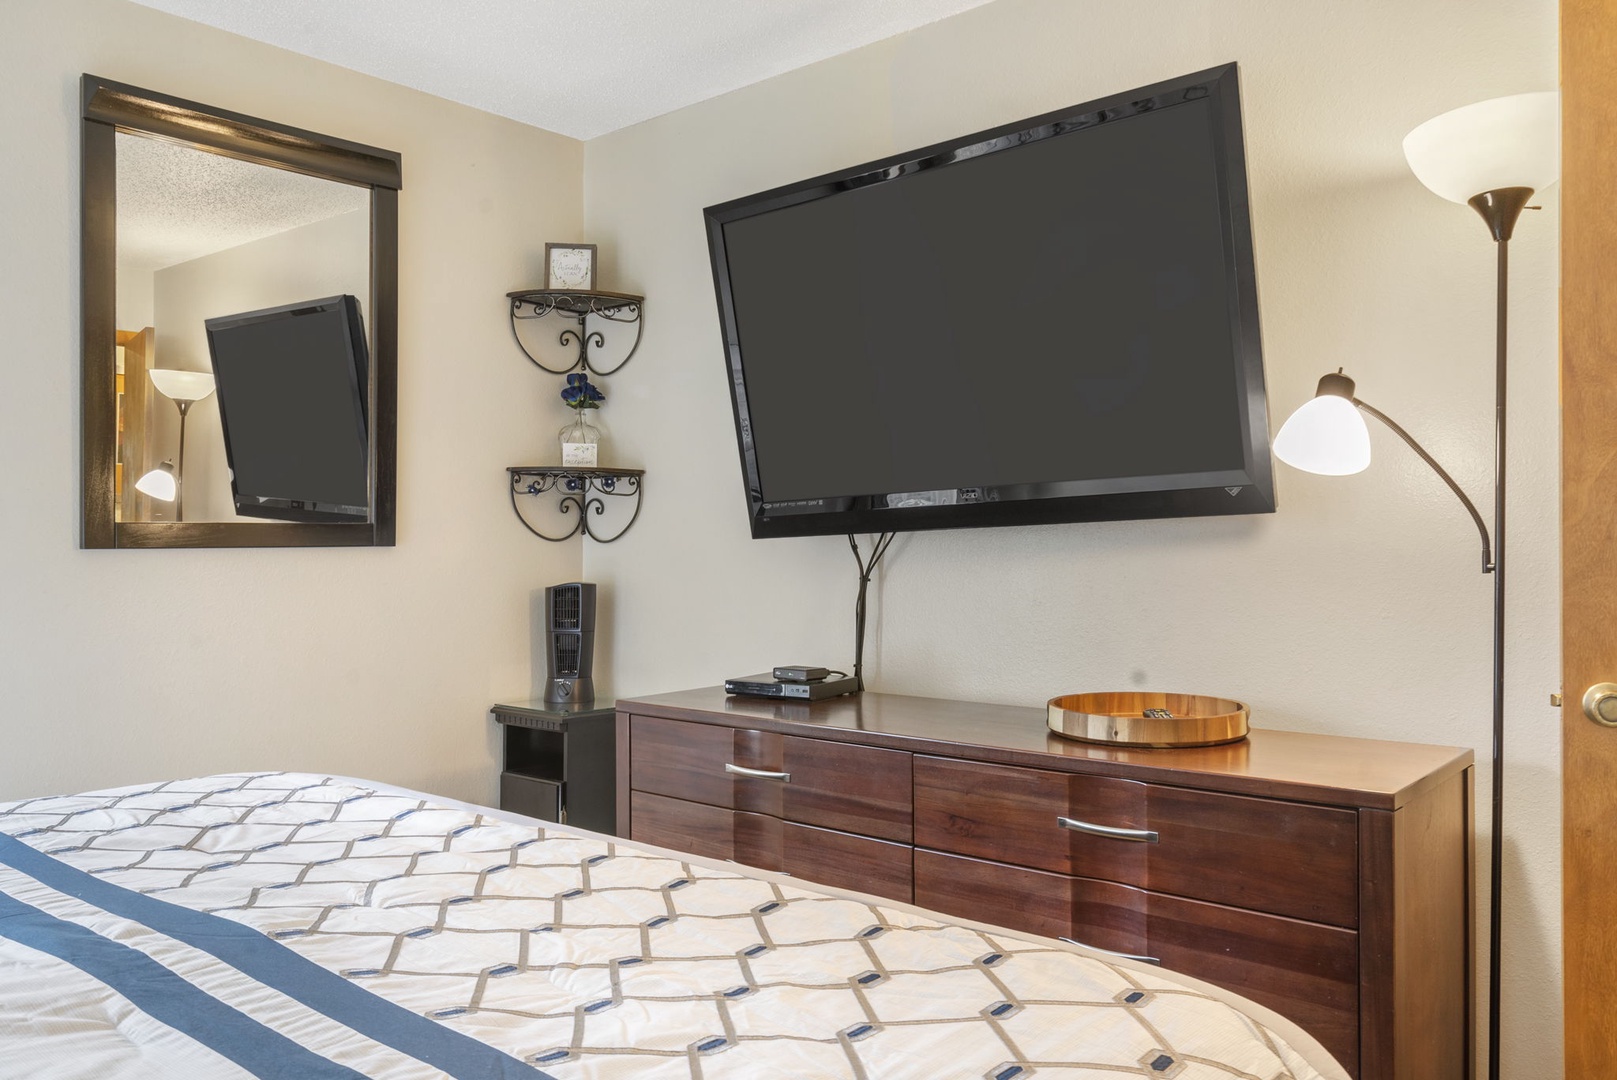 The king suite offers a private en suite, TV, and plenty of space to relax